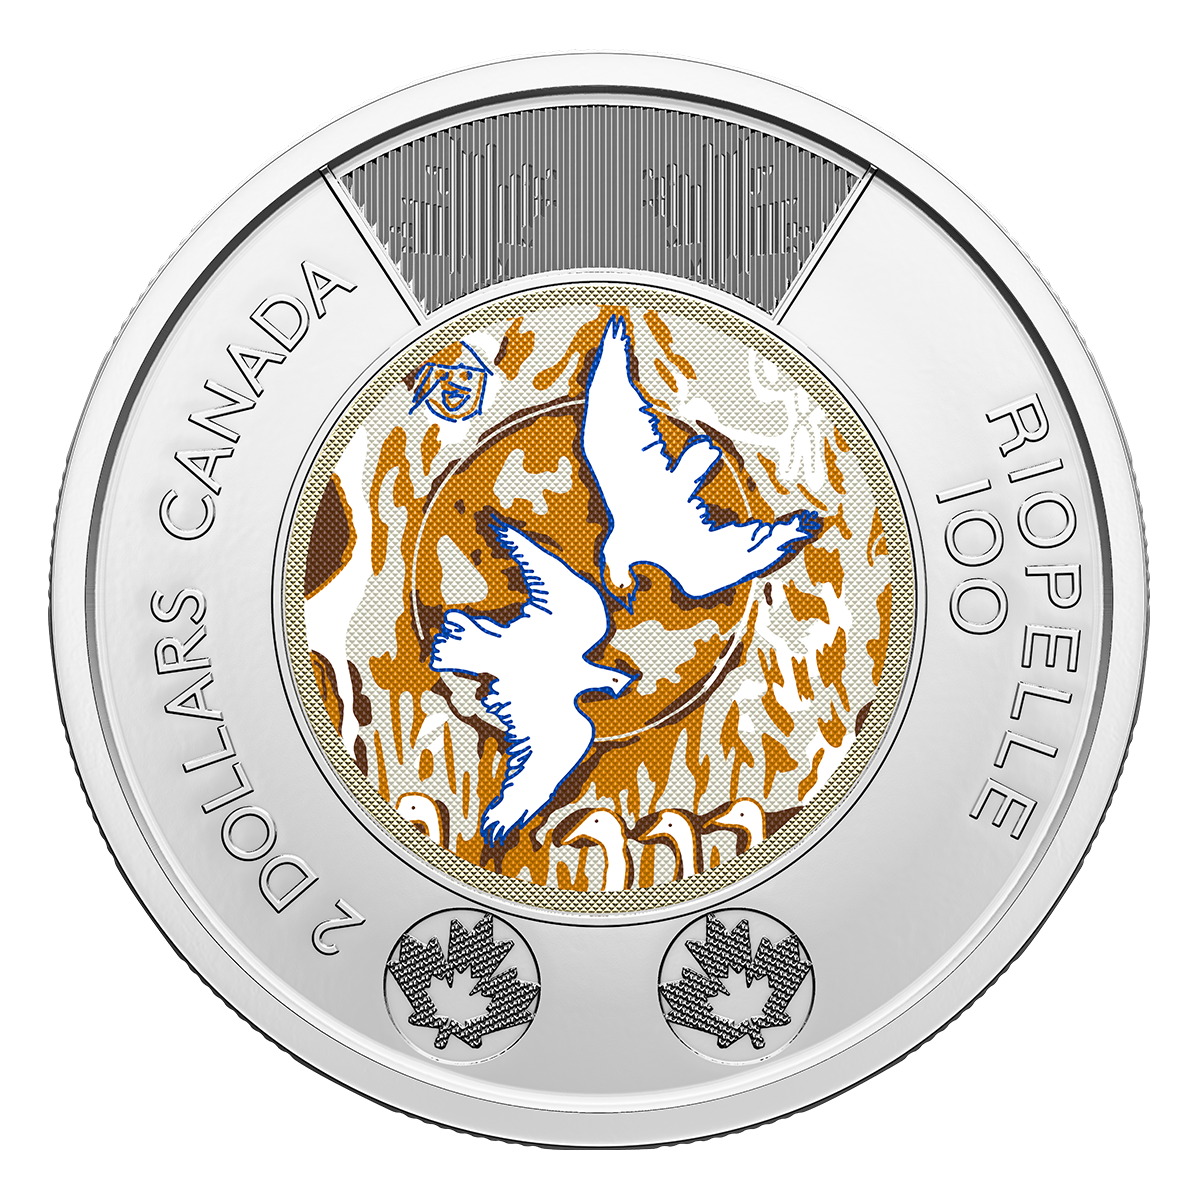 Canadian Coins, Gold, Silver & More | The Royal Canadian Mint